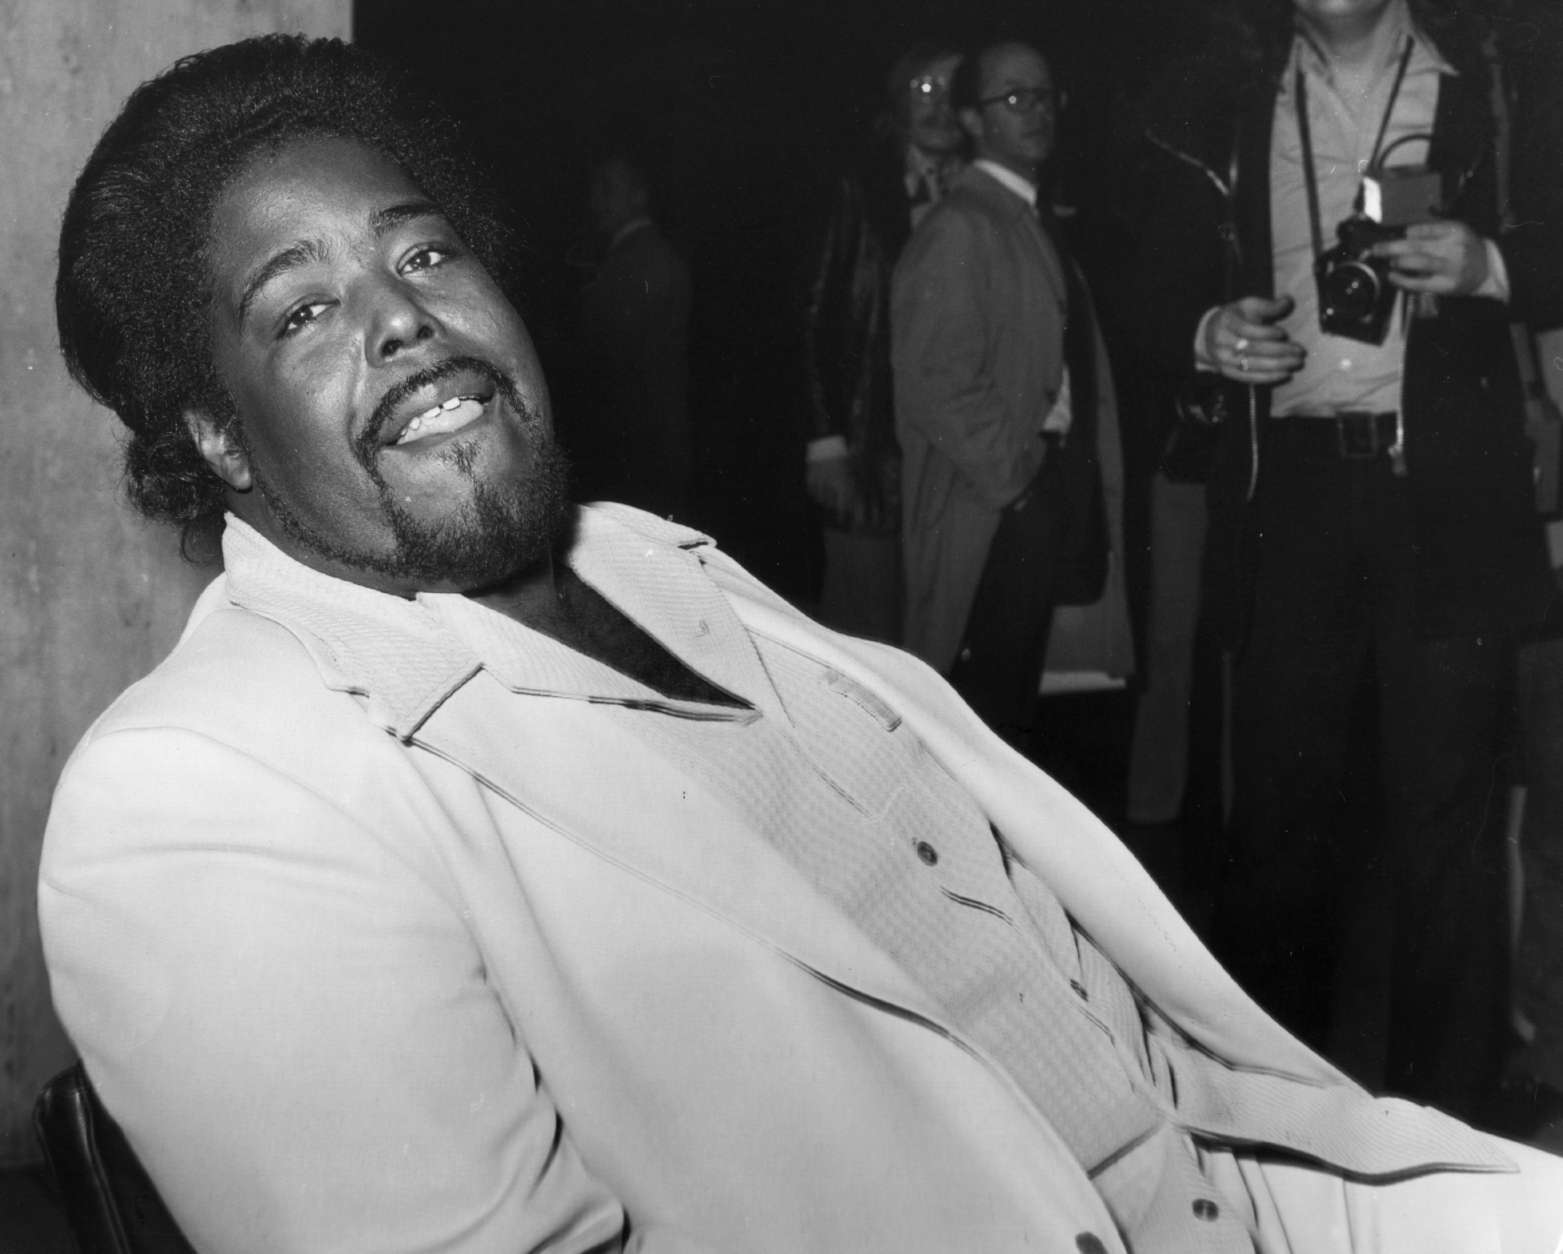 "Love Man" Barry White, for example, led and reflected changes in the thinking about black masculinity. (Photo by Frank Barratt/Keystone/Getty Images)